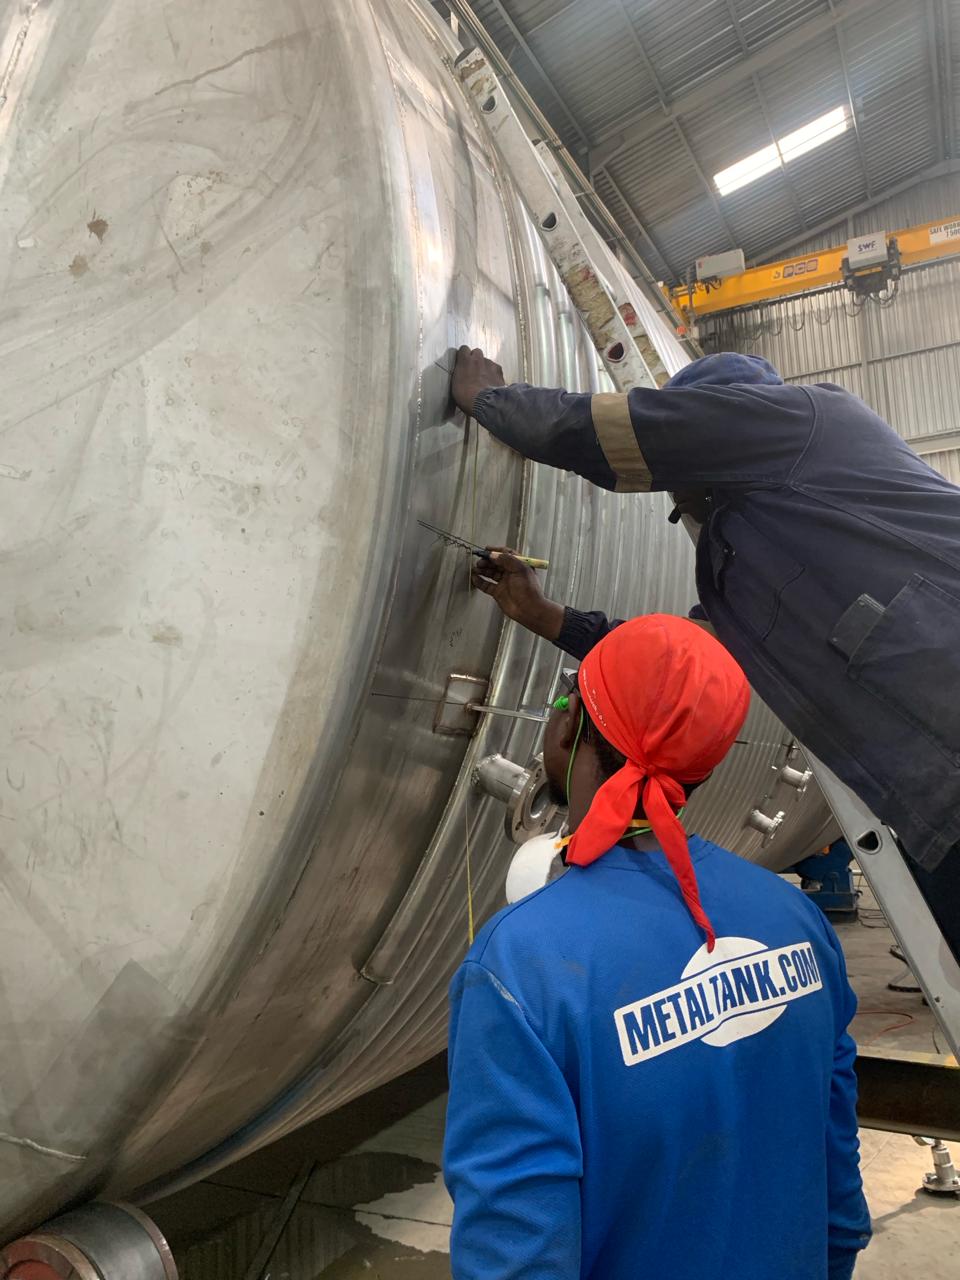 Precision:-noun-Mr Google says that it is the Quality, Condition, or Fact of being Exact and Accurate. And that’s exactly what Metal Tank Industries strive to do. Our Customers Deserve the Best and we will do the Job with Exactness.